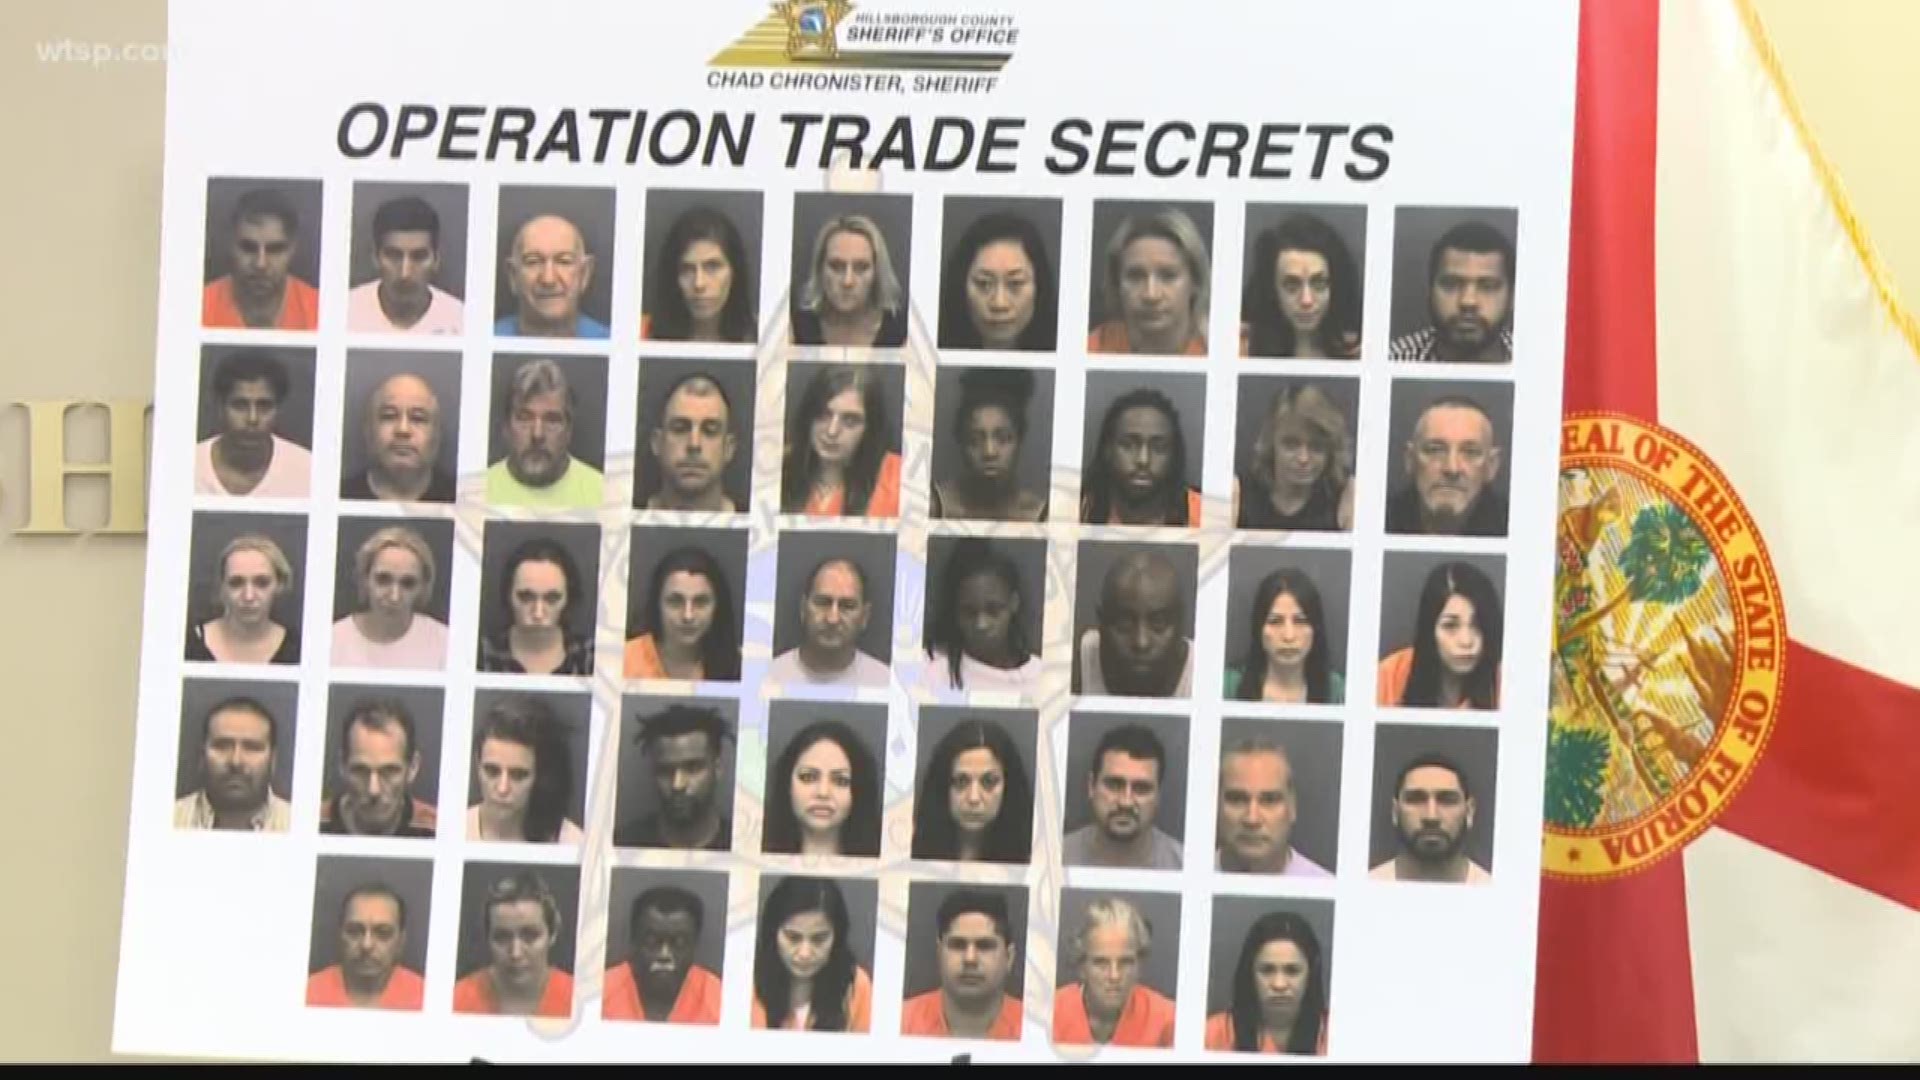 More than 80 people were arrested in the last six months as part of a human trafficking investigation in Hillsborough County.

Sheriff Chad Chronister shared more details about "Operation Trade Secrets" during a Monday news conference. Chronister said the investigation began in January and 85 people were arrested.

Chronister said the operation involved investigating hotels, motels, spas, massage parlors, strip clubs and adult book stores. Charges include human trafficking, possession of a controlled substance, practicing massage without a license, child pornography and voyeurism.